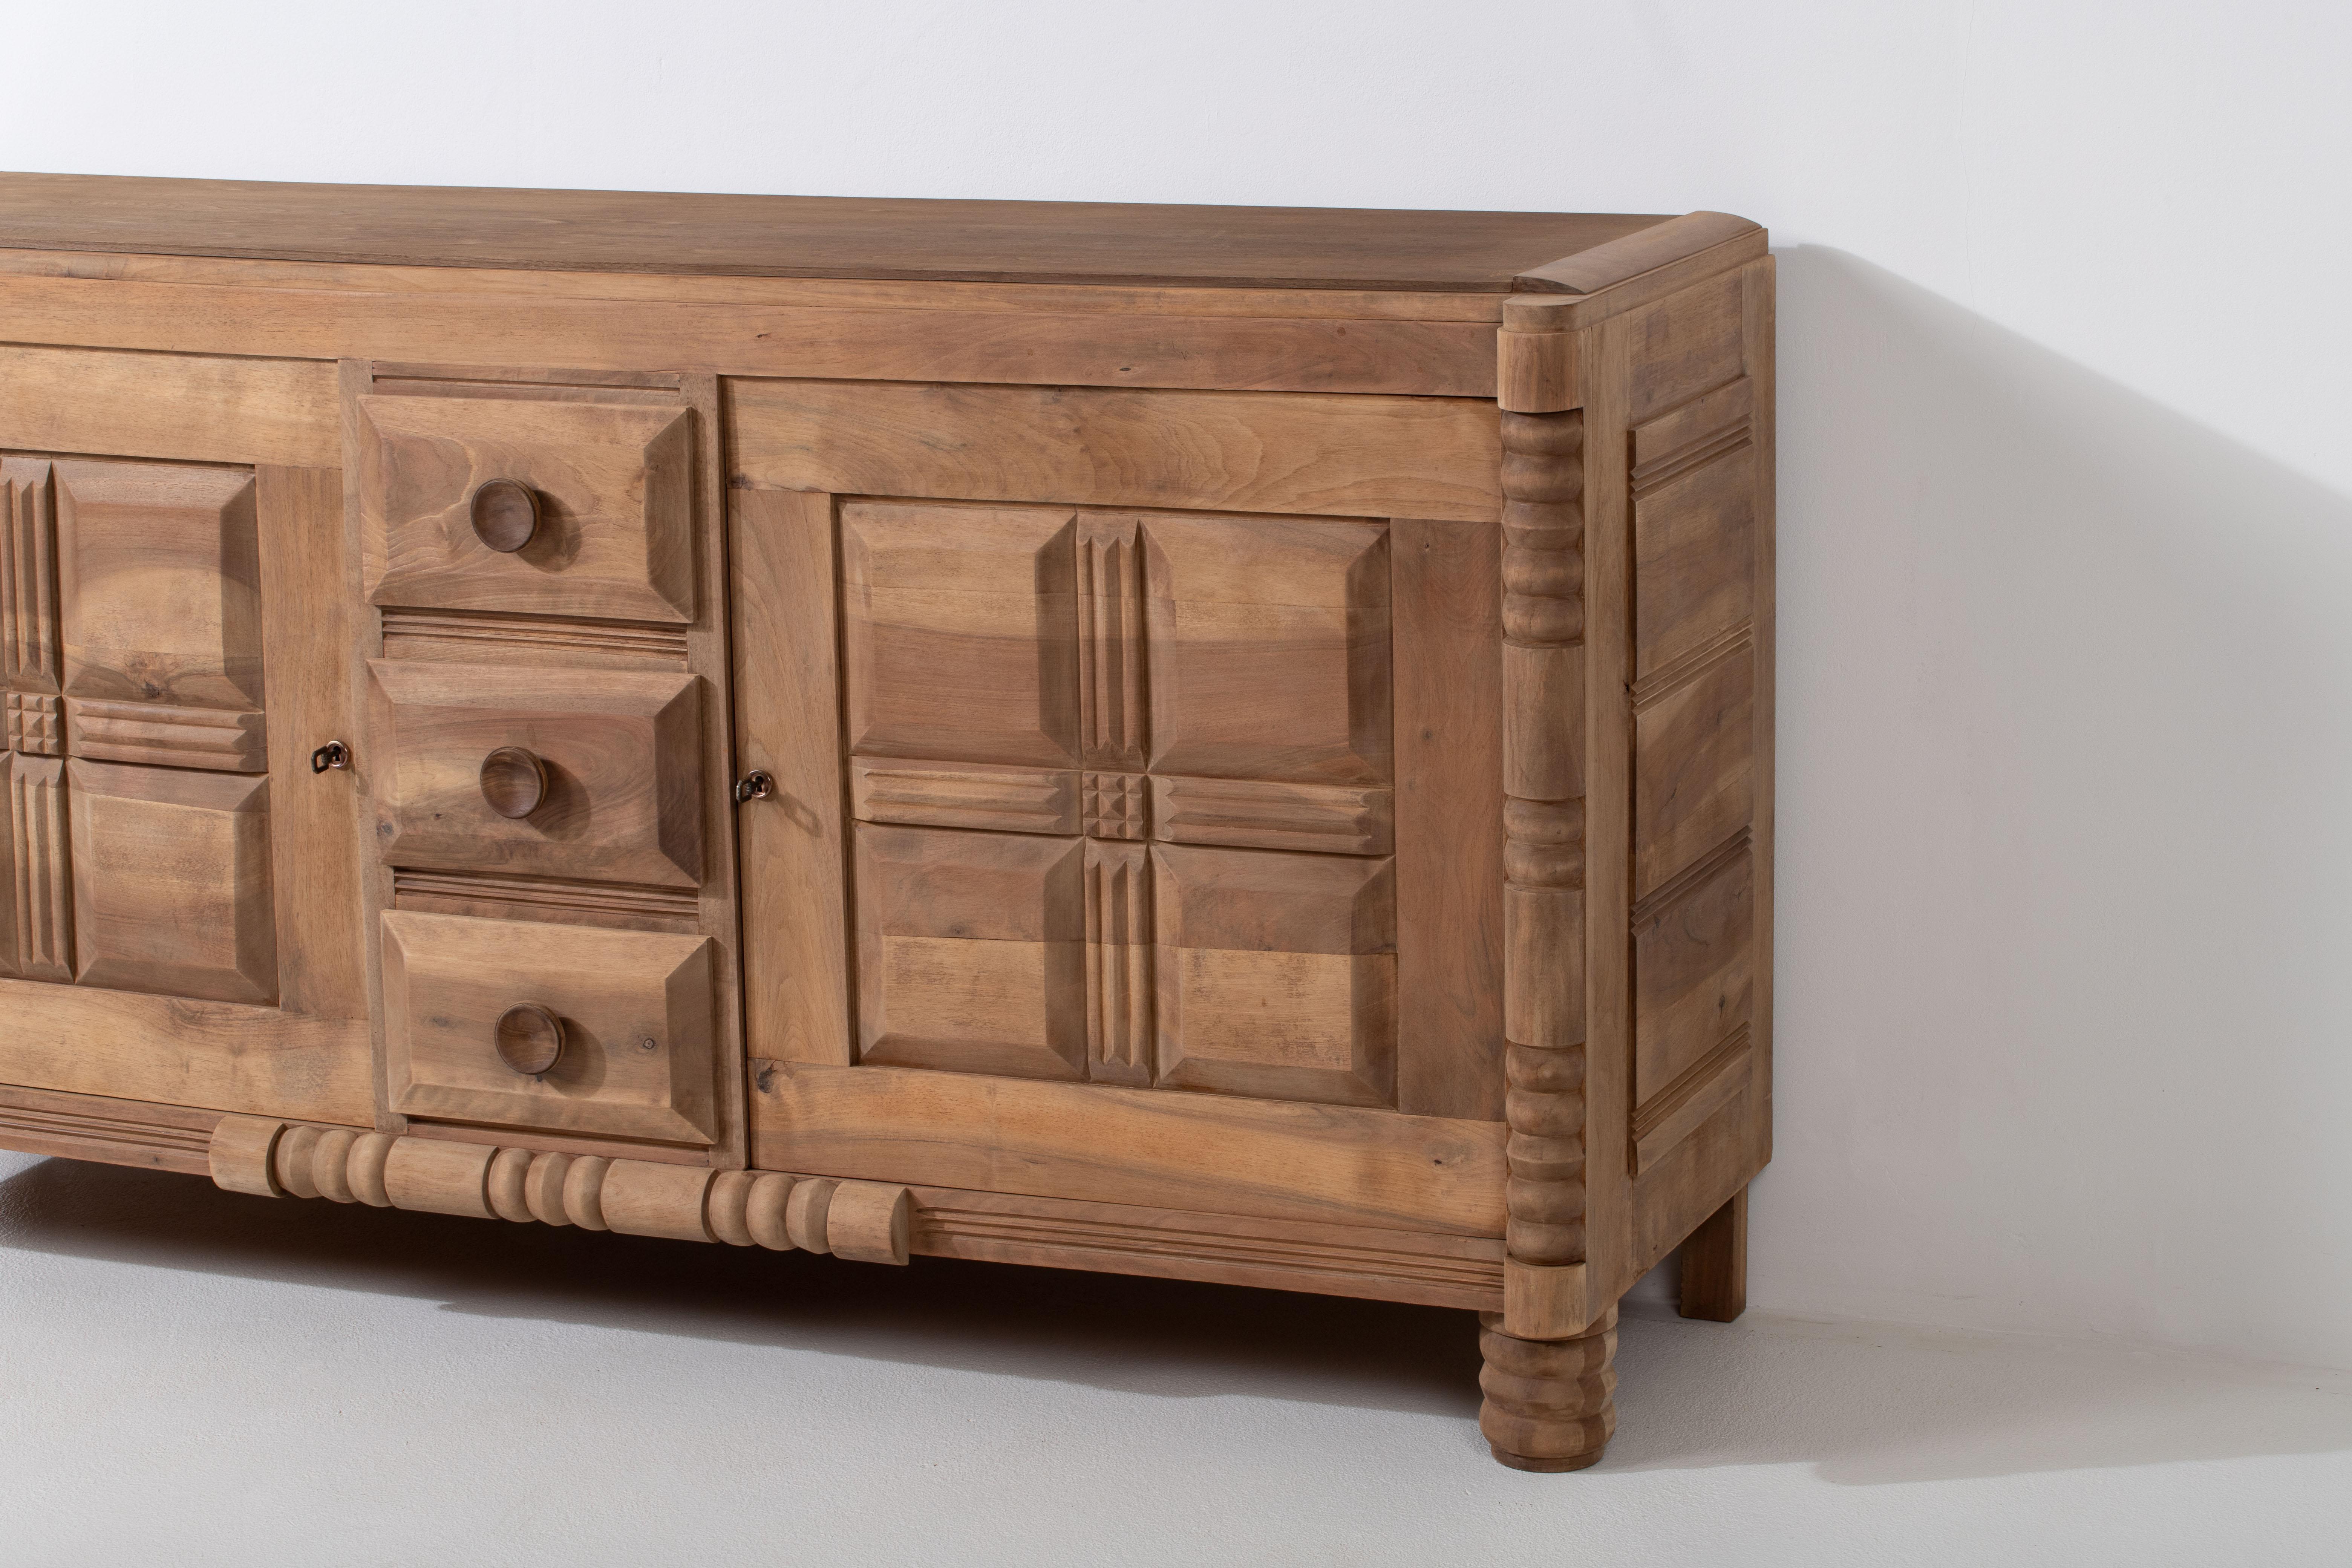 French Solid Oak Credenza with Graphic Details, France, 1940s For Sale